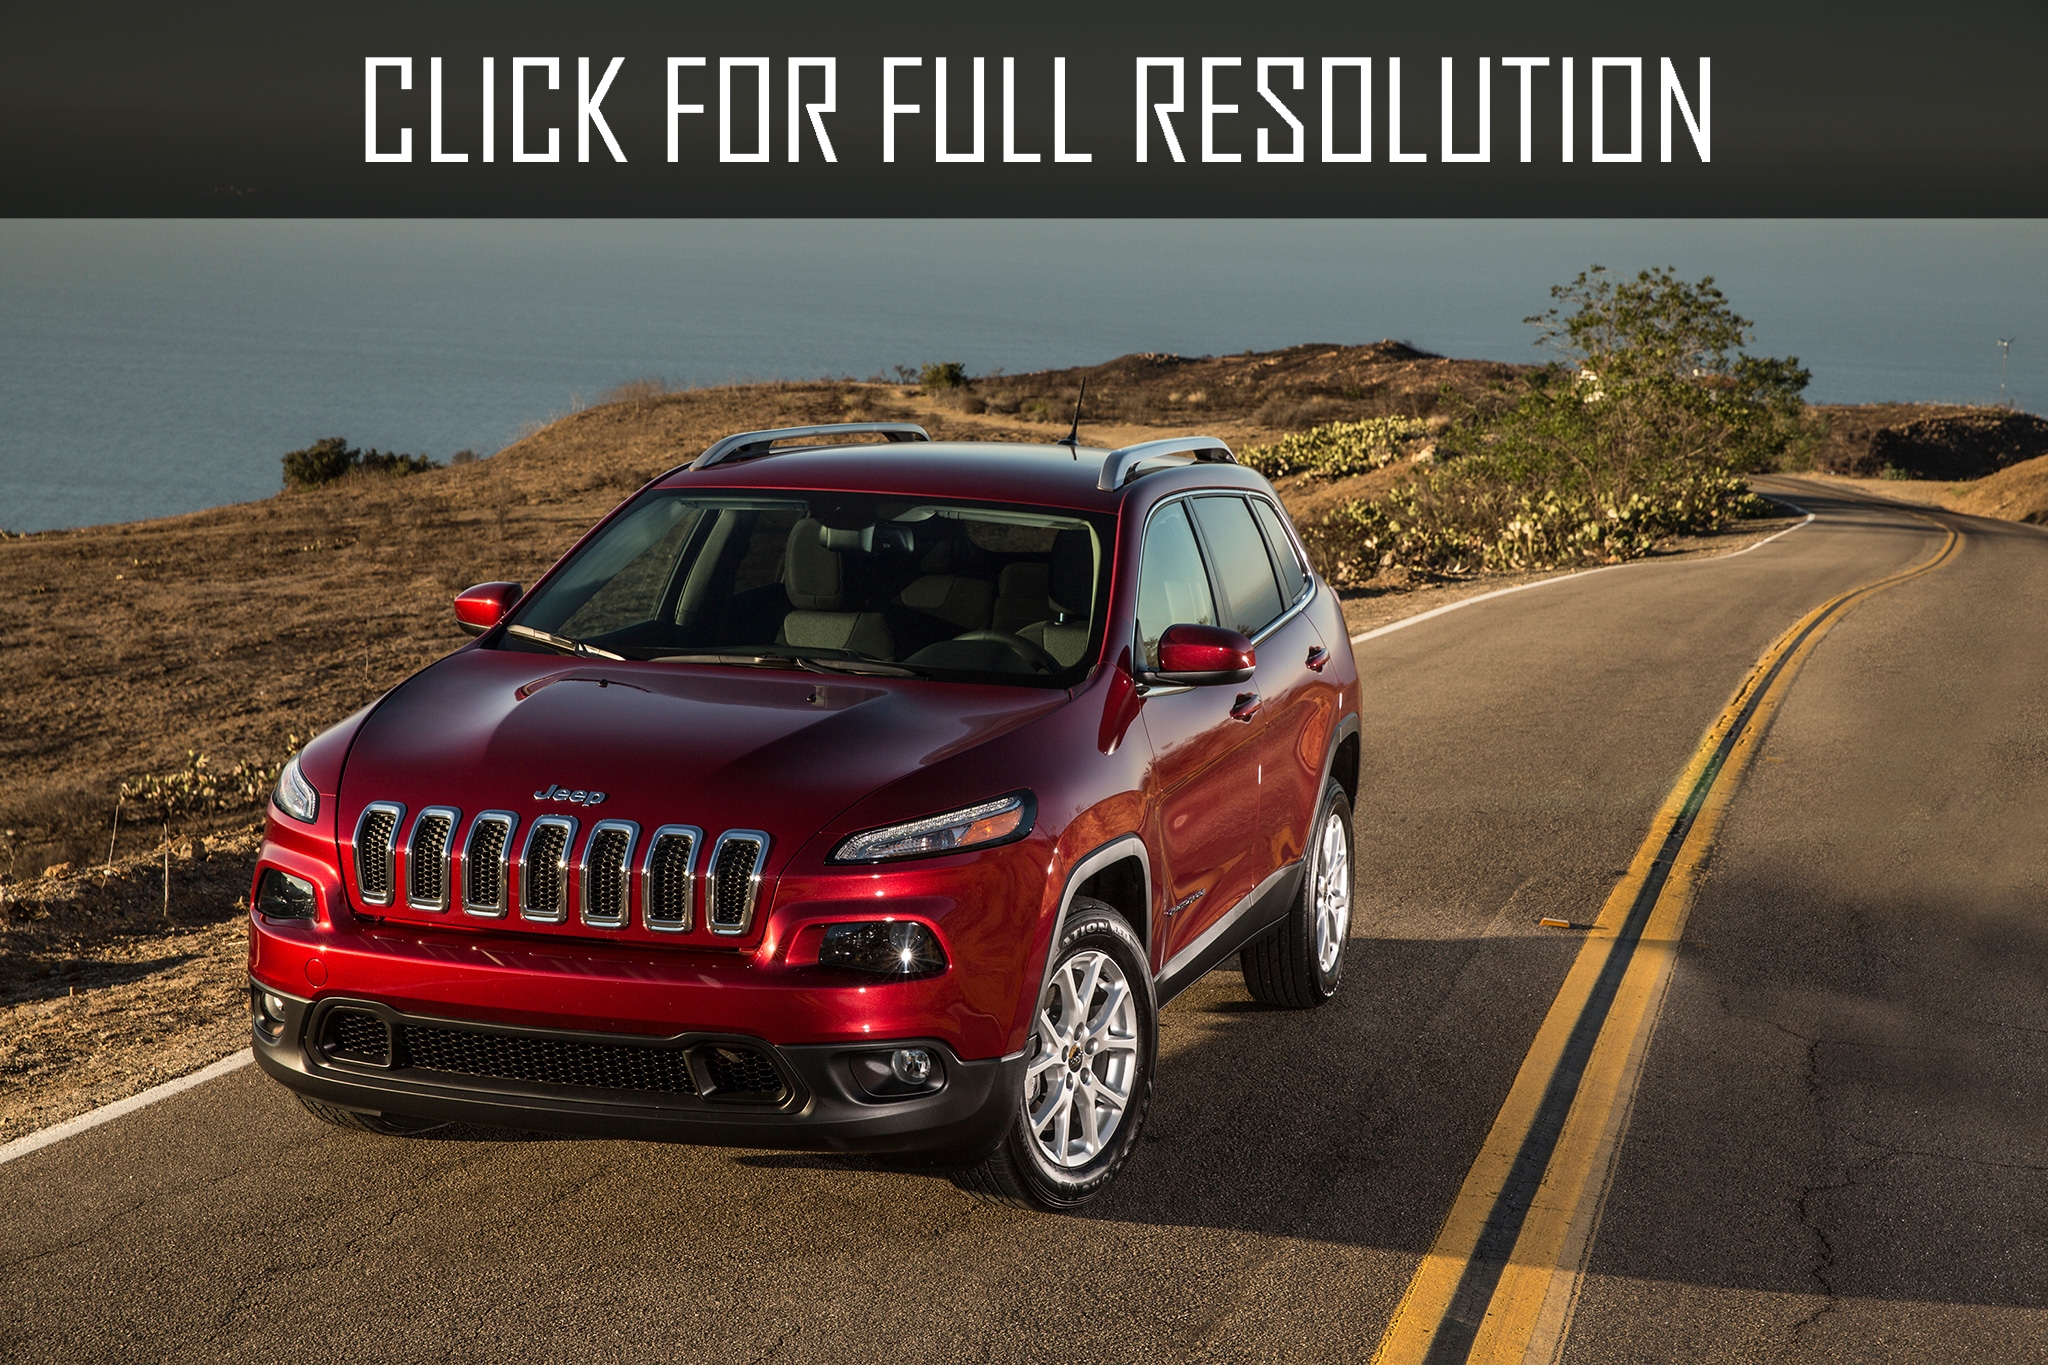 2017 Jeep Cherokee Latitude news, reviews, msrp, ratings with amazing